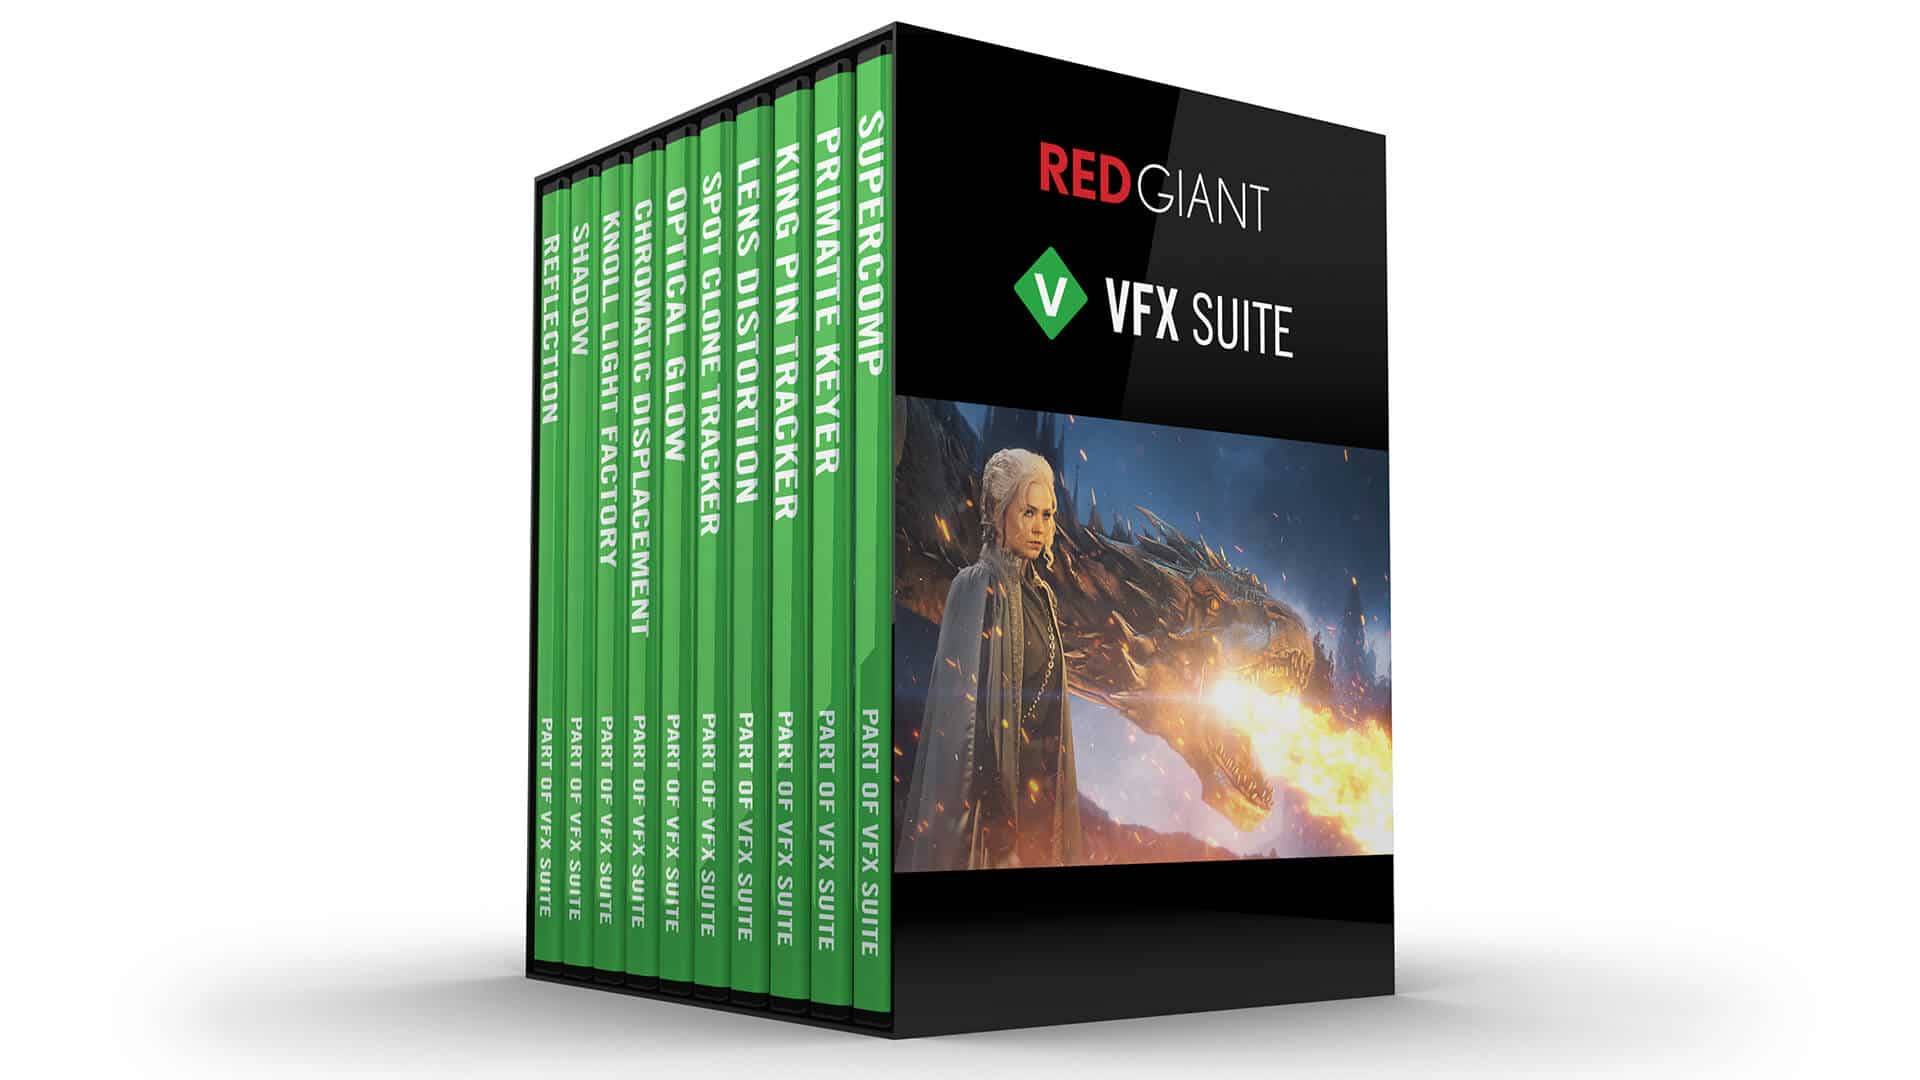 Red Giant Box Set - computer graphic rendering by Guedin Designs.